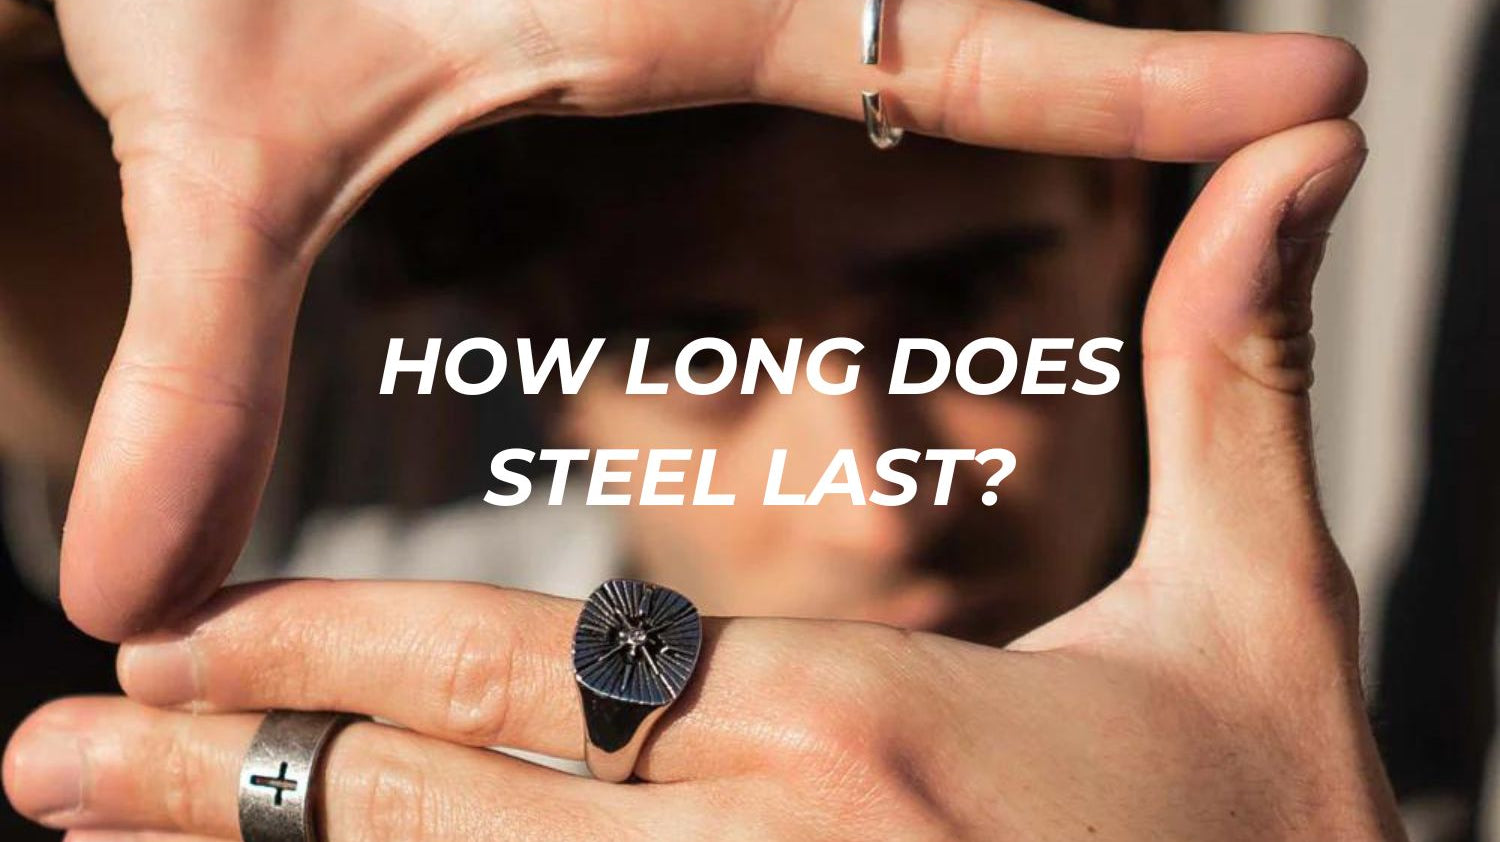 HOW LONG DOES STAINLESS STEEL LAST?